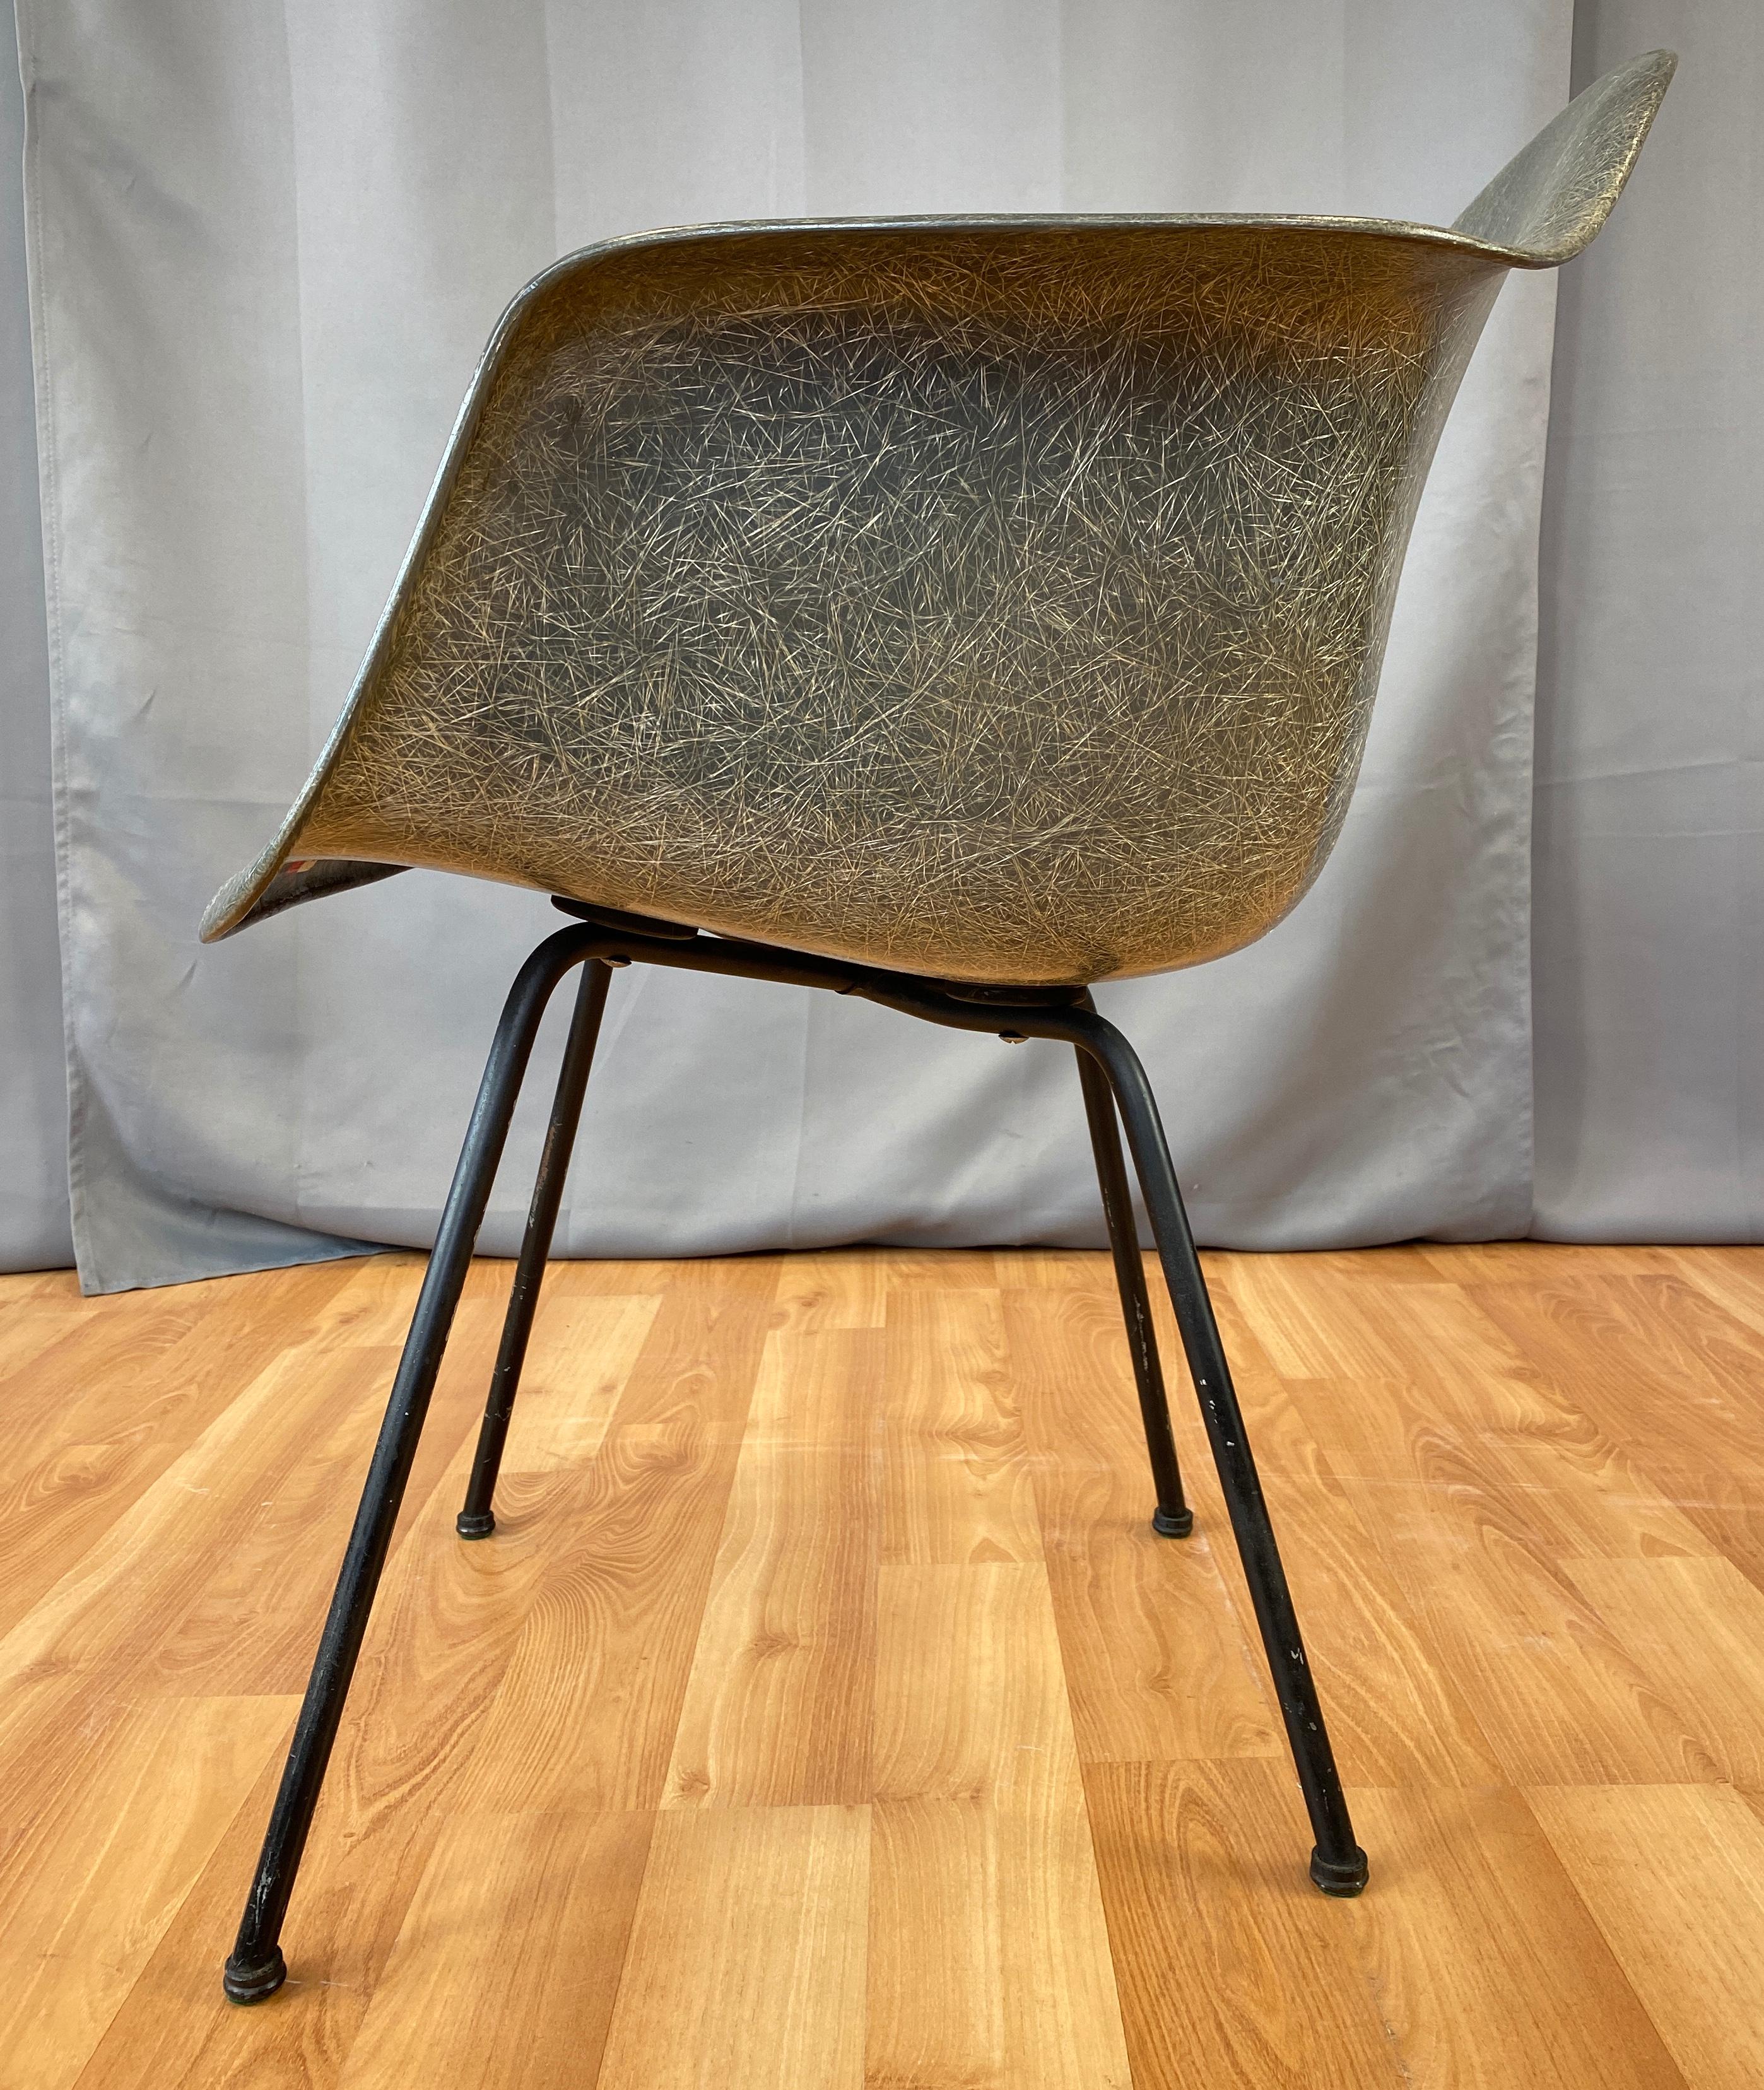 American 1st Generation Zenith Plastic Rope Edge Chair, Charles Eames for Herman Miller B